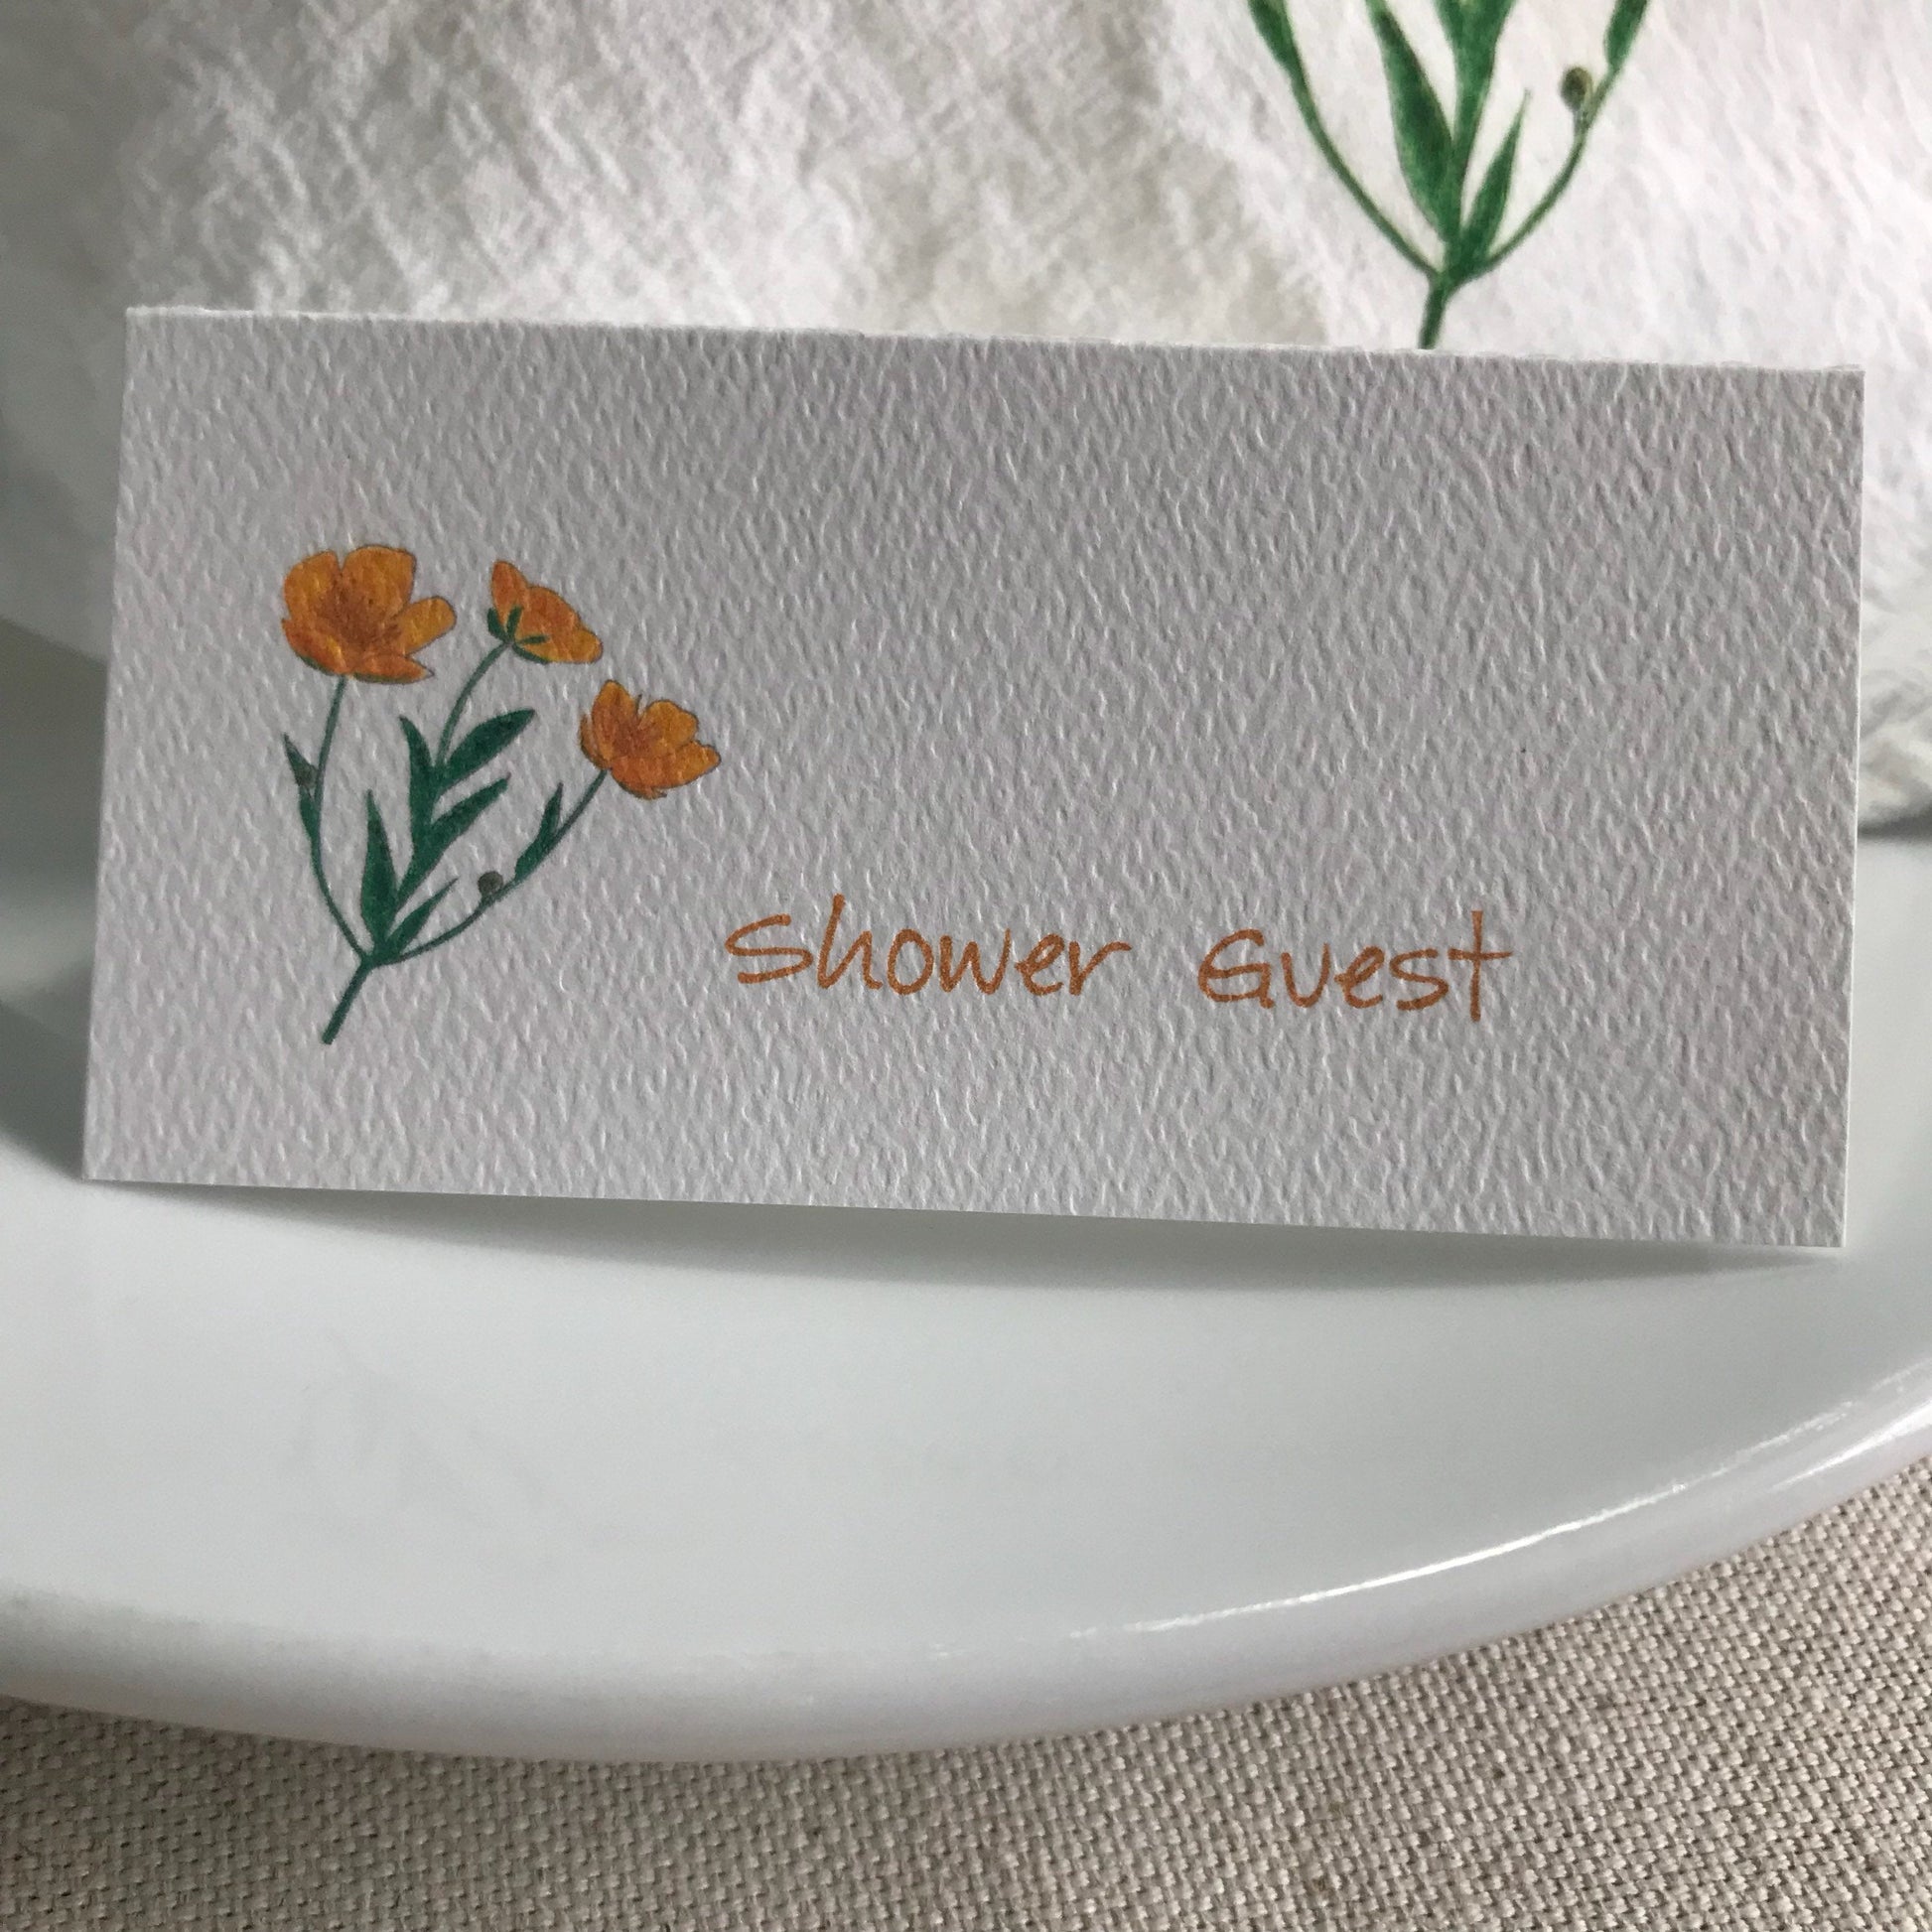 Buttercup Flowers Place Cards, Tented Cards, Personalized Seating, Blank Name Cards, Wedding Event Cards, Tented Cards, Bridal Shower, Party.